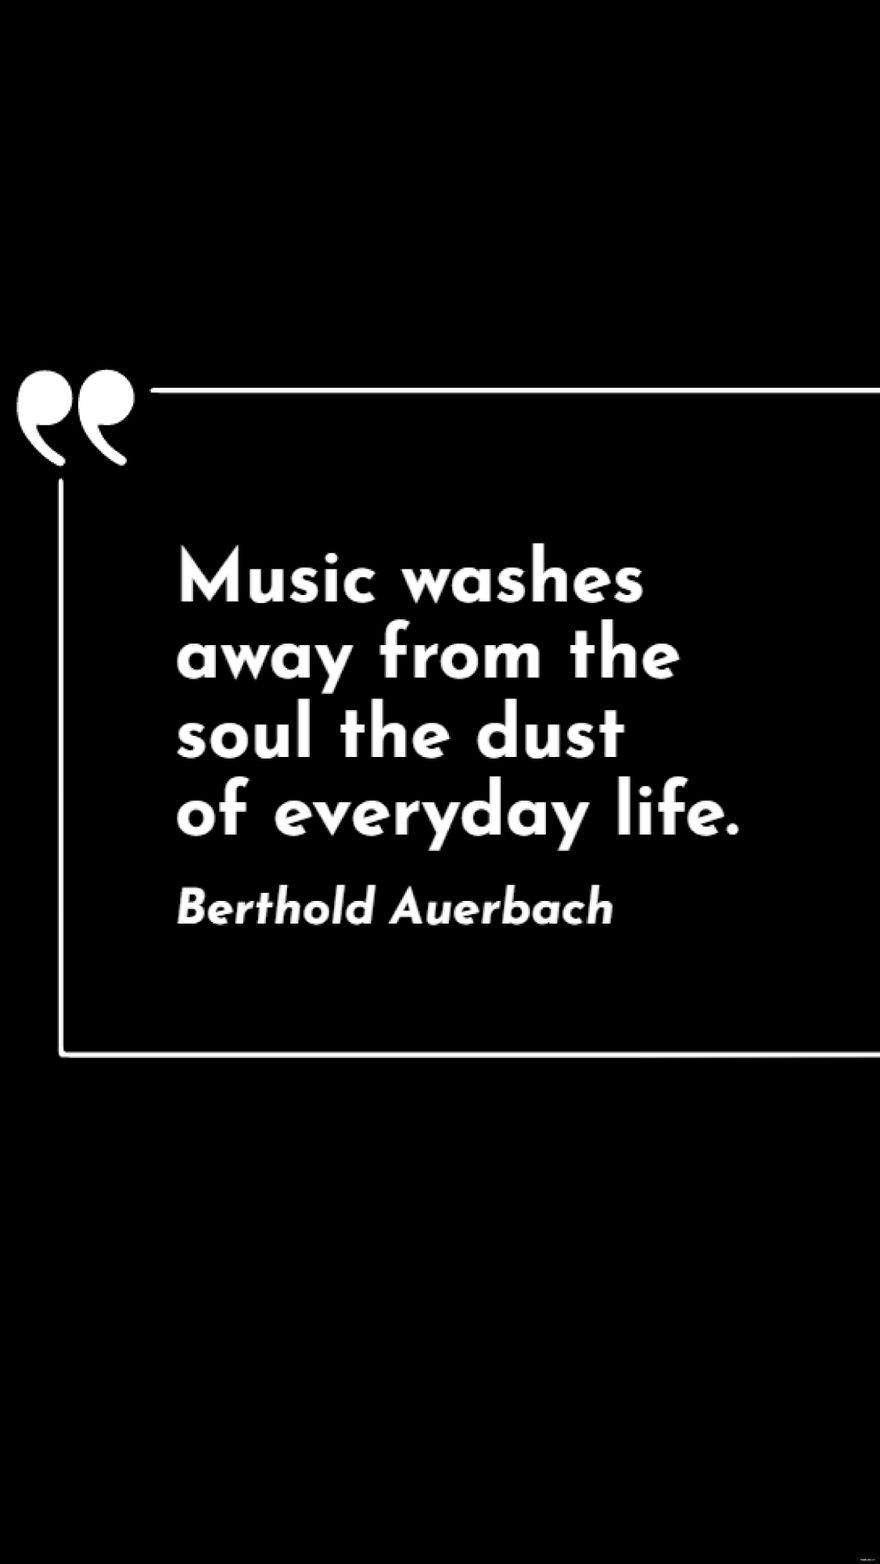 Free Berthold Auerbach - Music washes away from the soul the dust of everyday life. in JPG